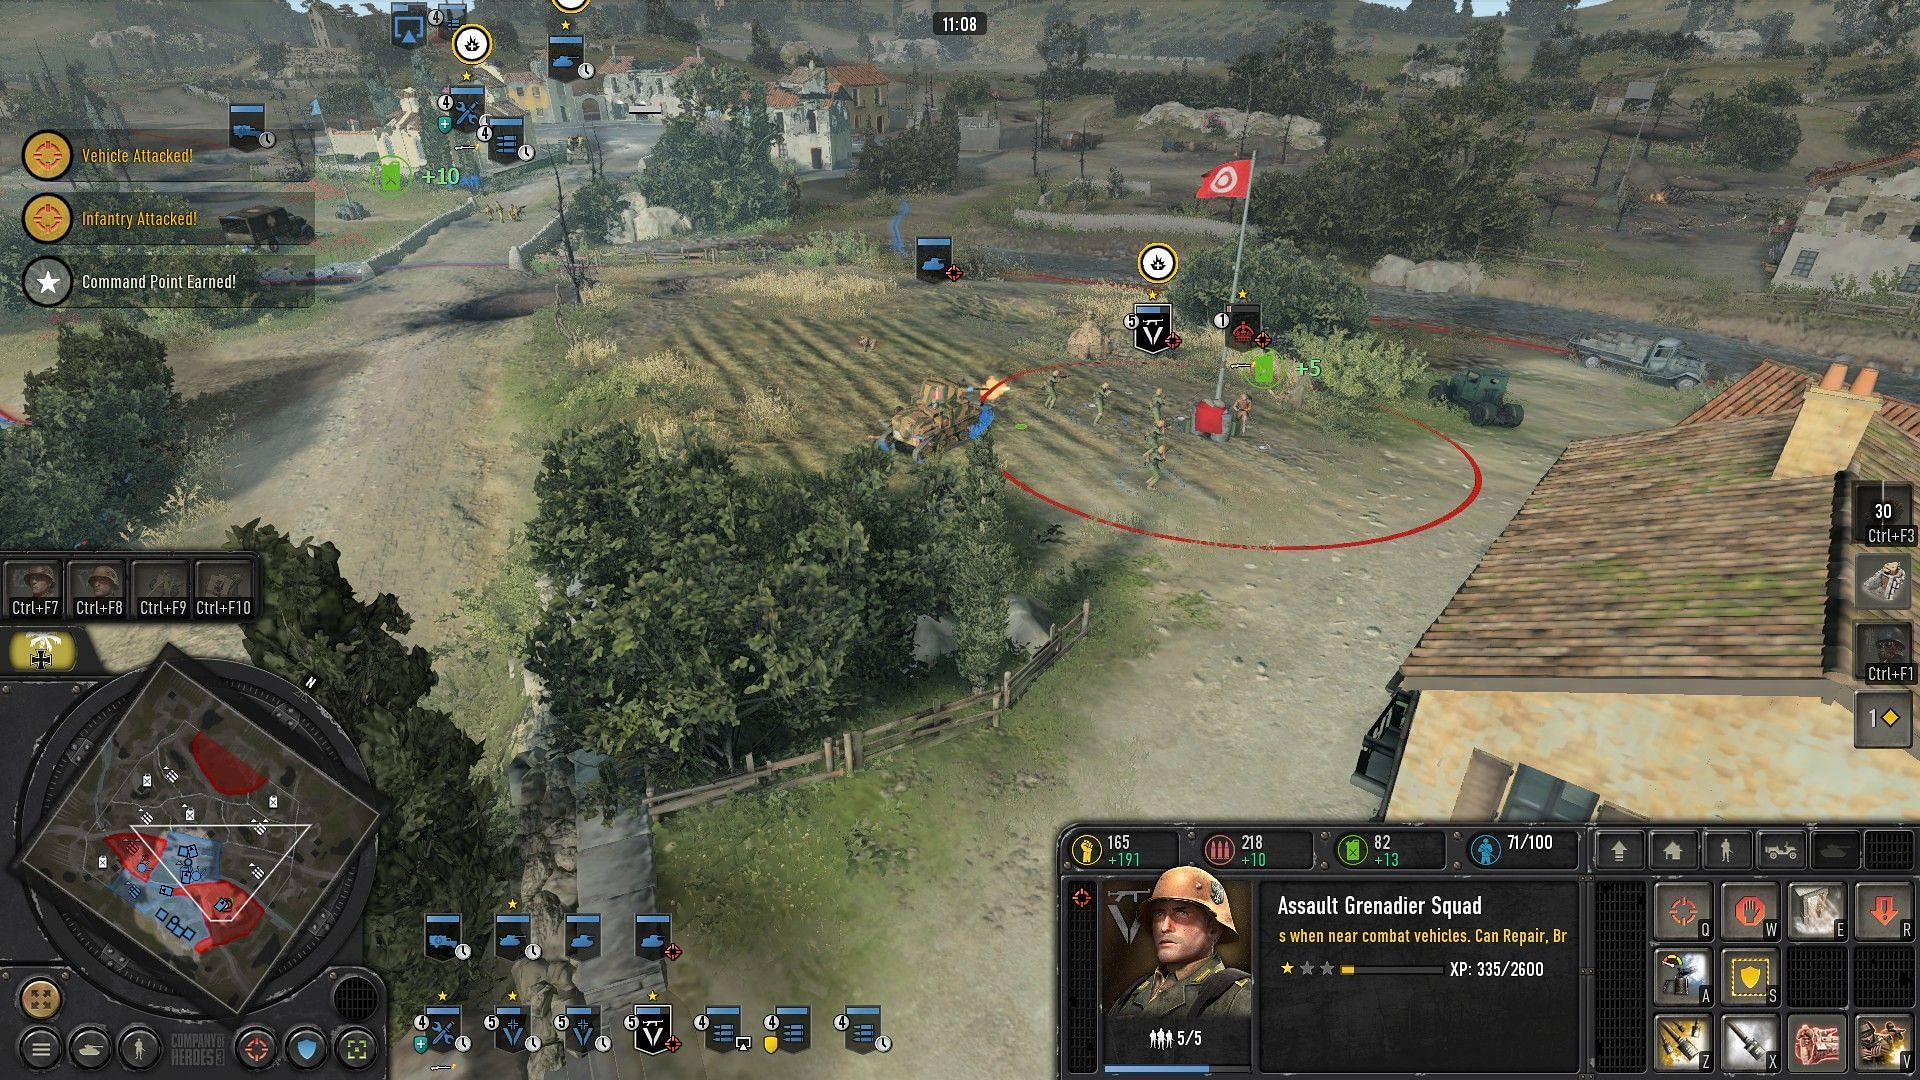 Strategize to emerge victorious (Screenshot from Company of Heroes 3)